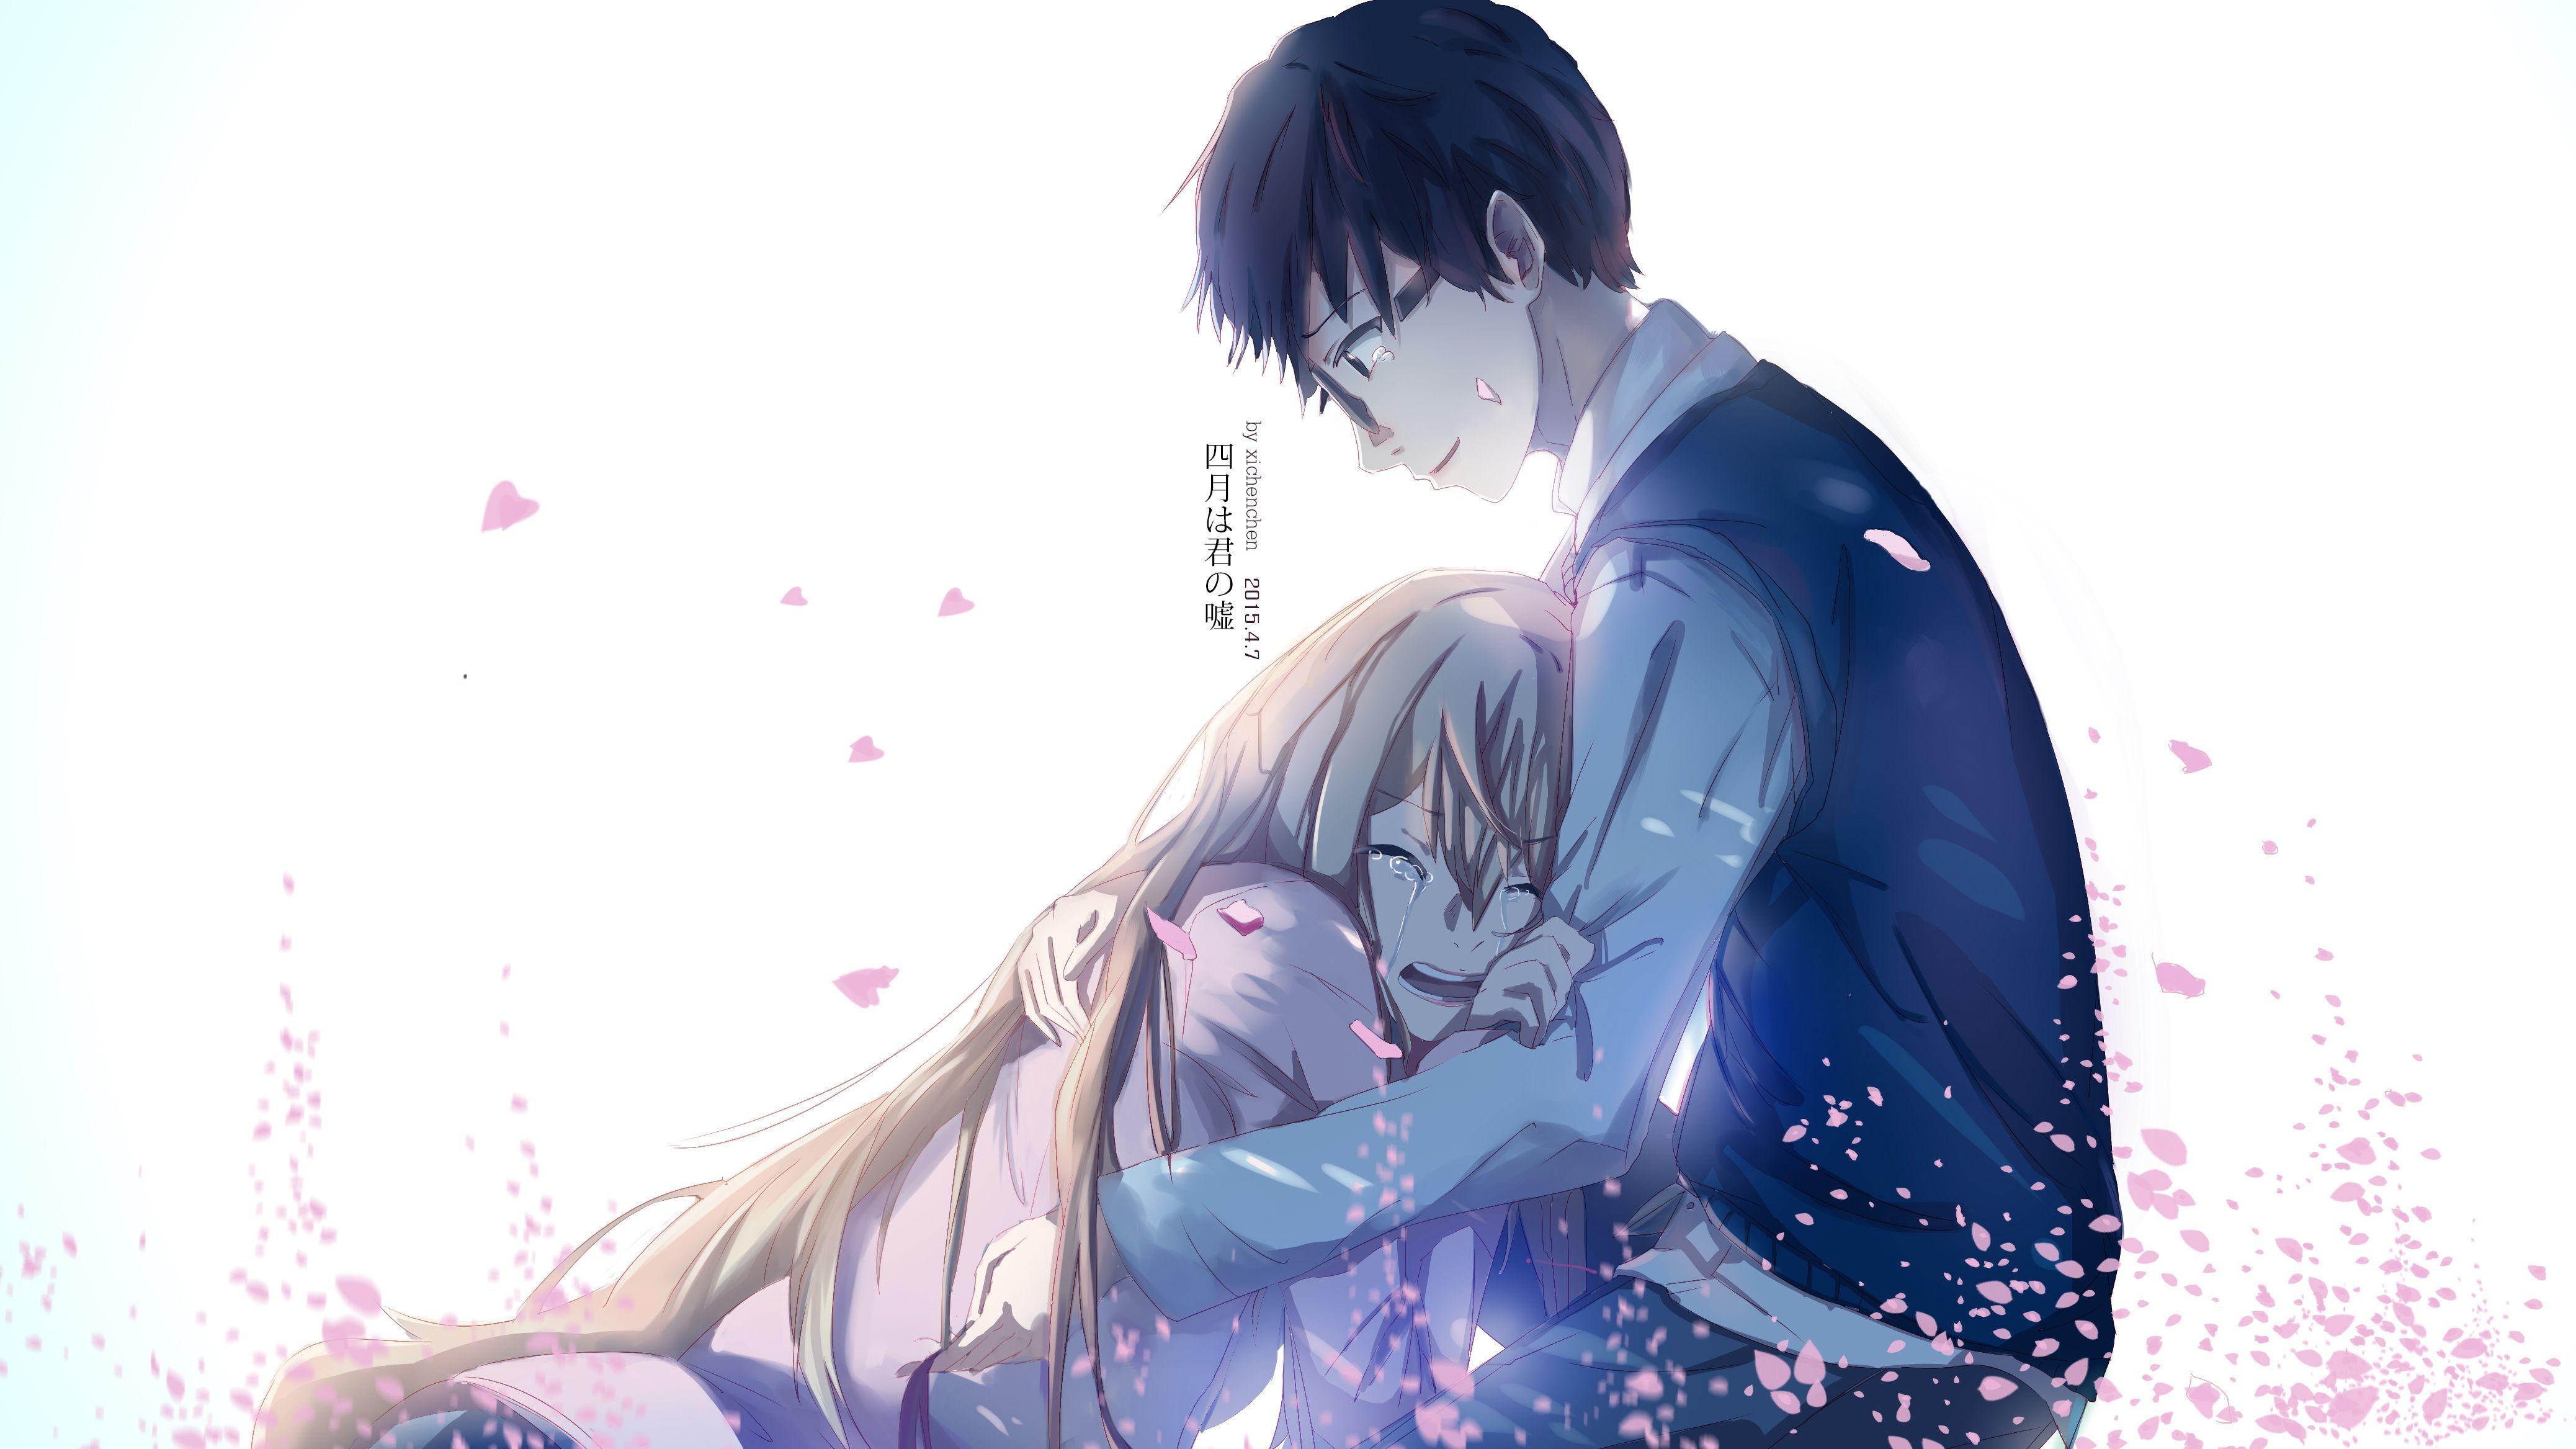 Your Lie In April Wallpapers HD Free download 